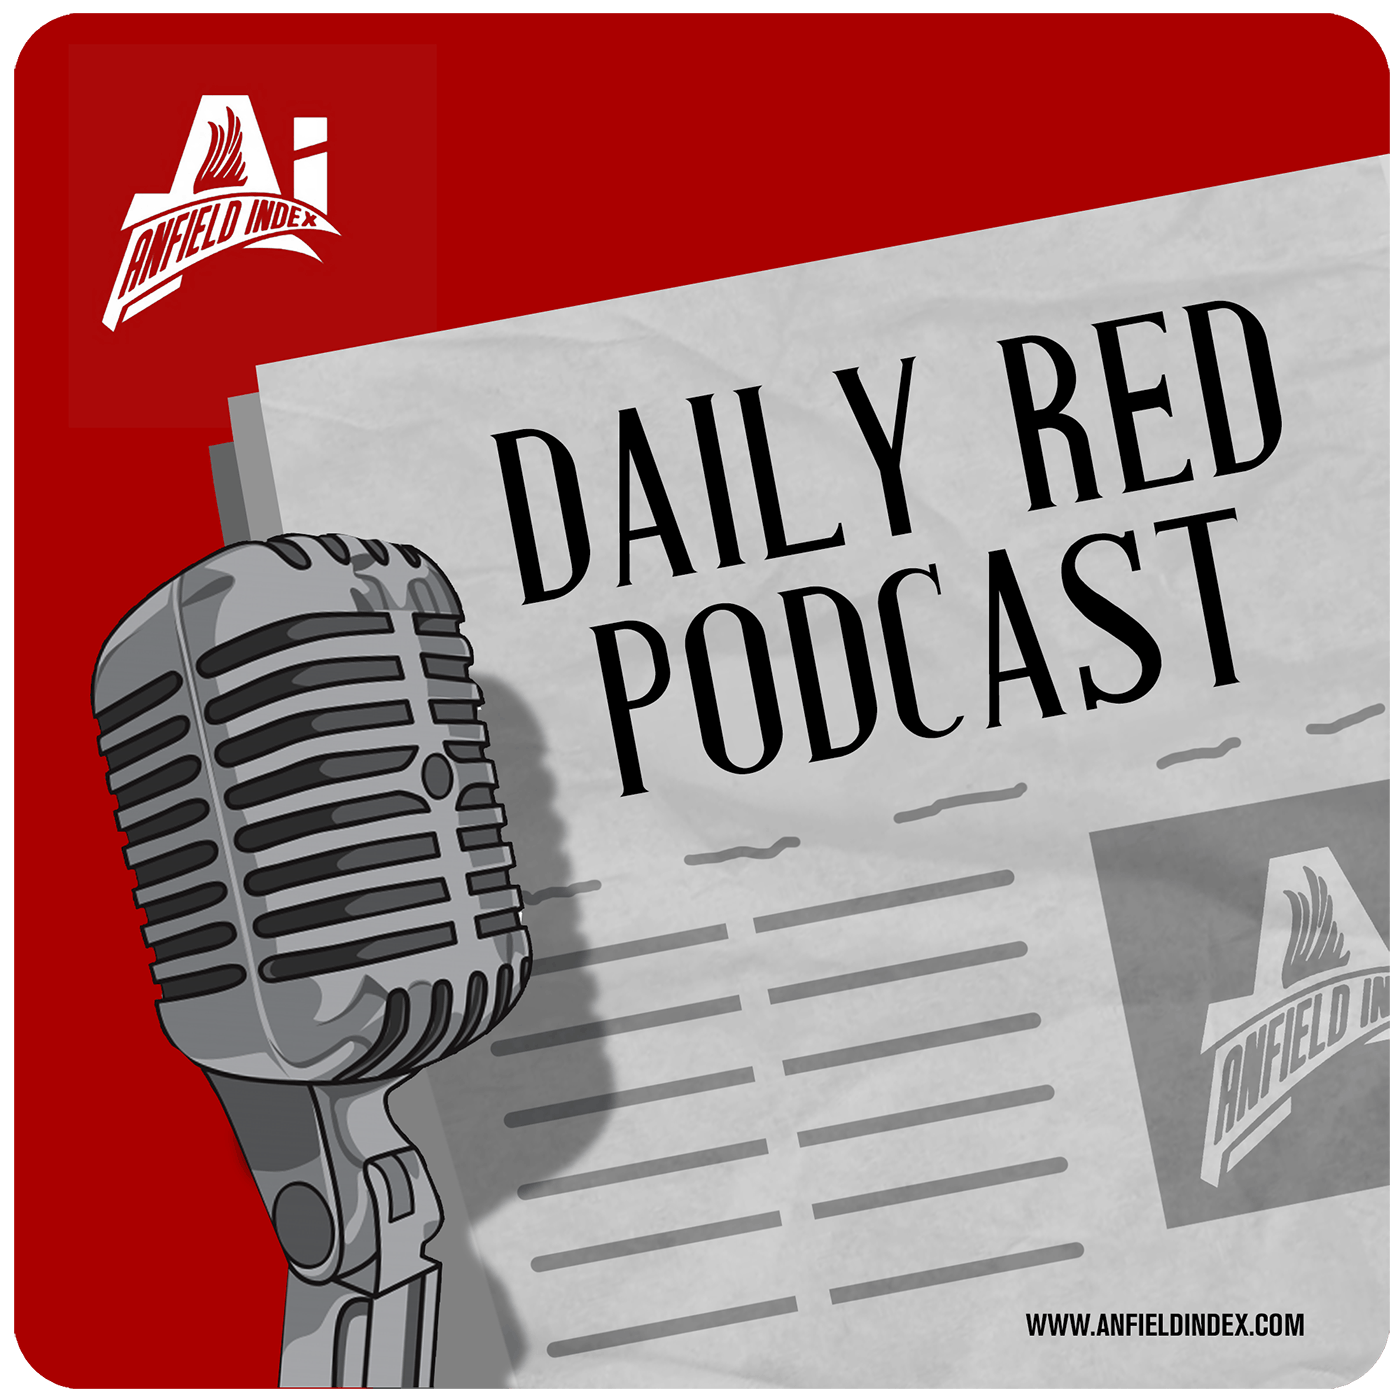 WILLIAMS AND DIAZ, INTERCHANGE AND YORO HOPES FADE : Daily Red Podcast